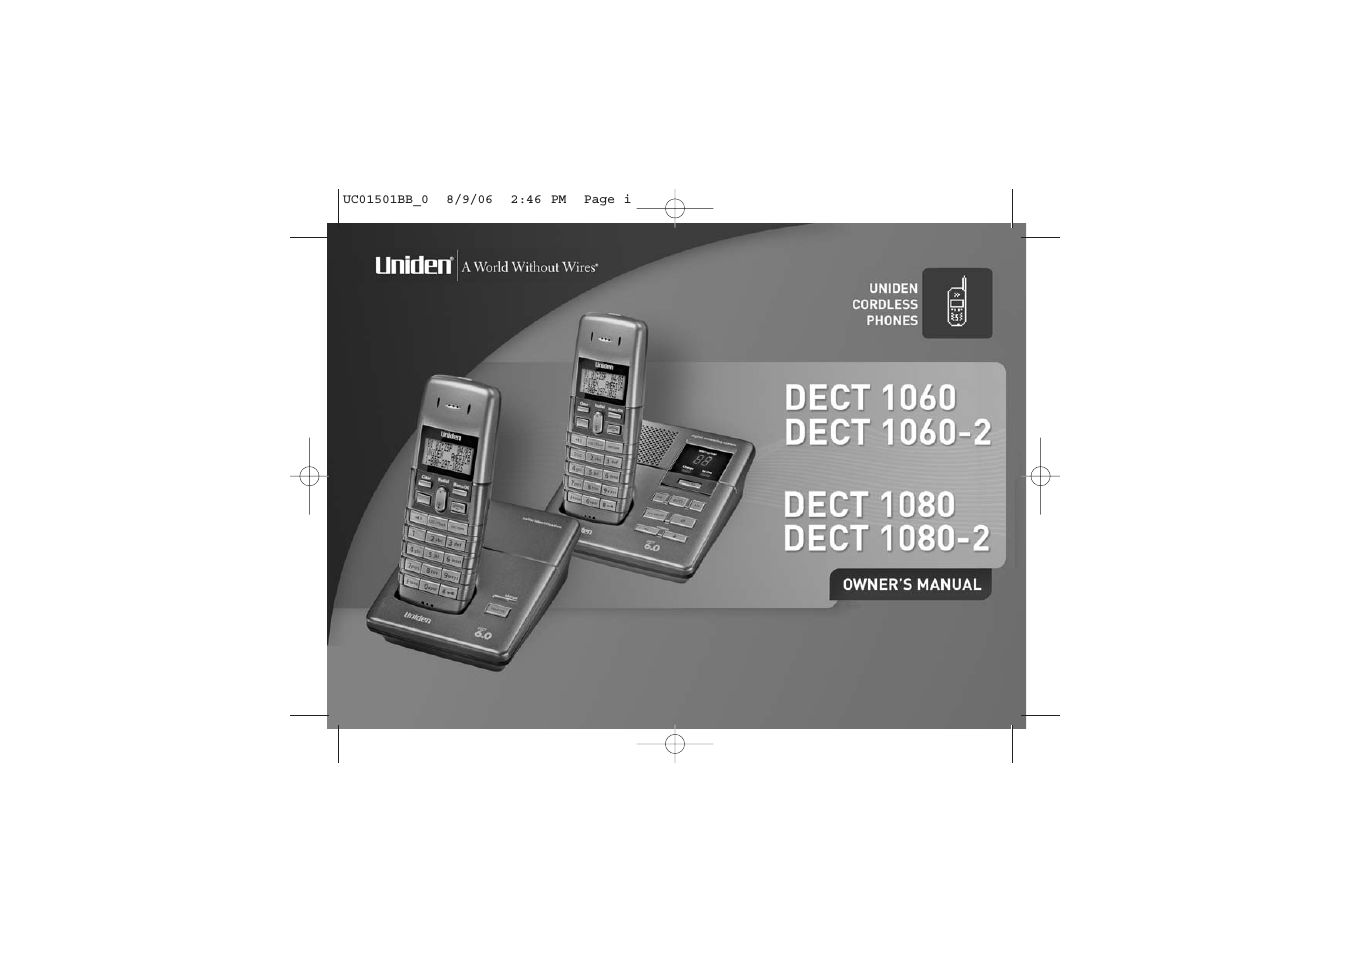 DECT1080-2 (Page 1)